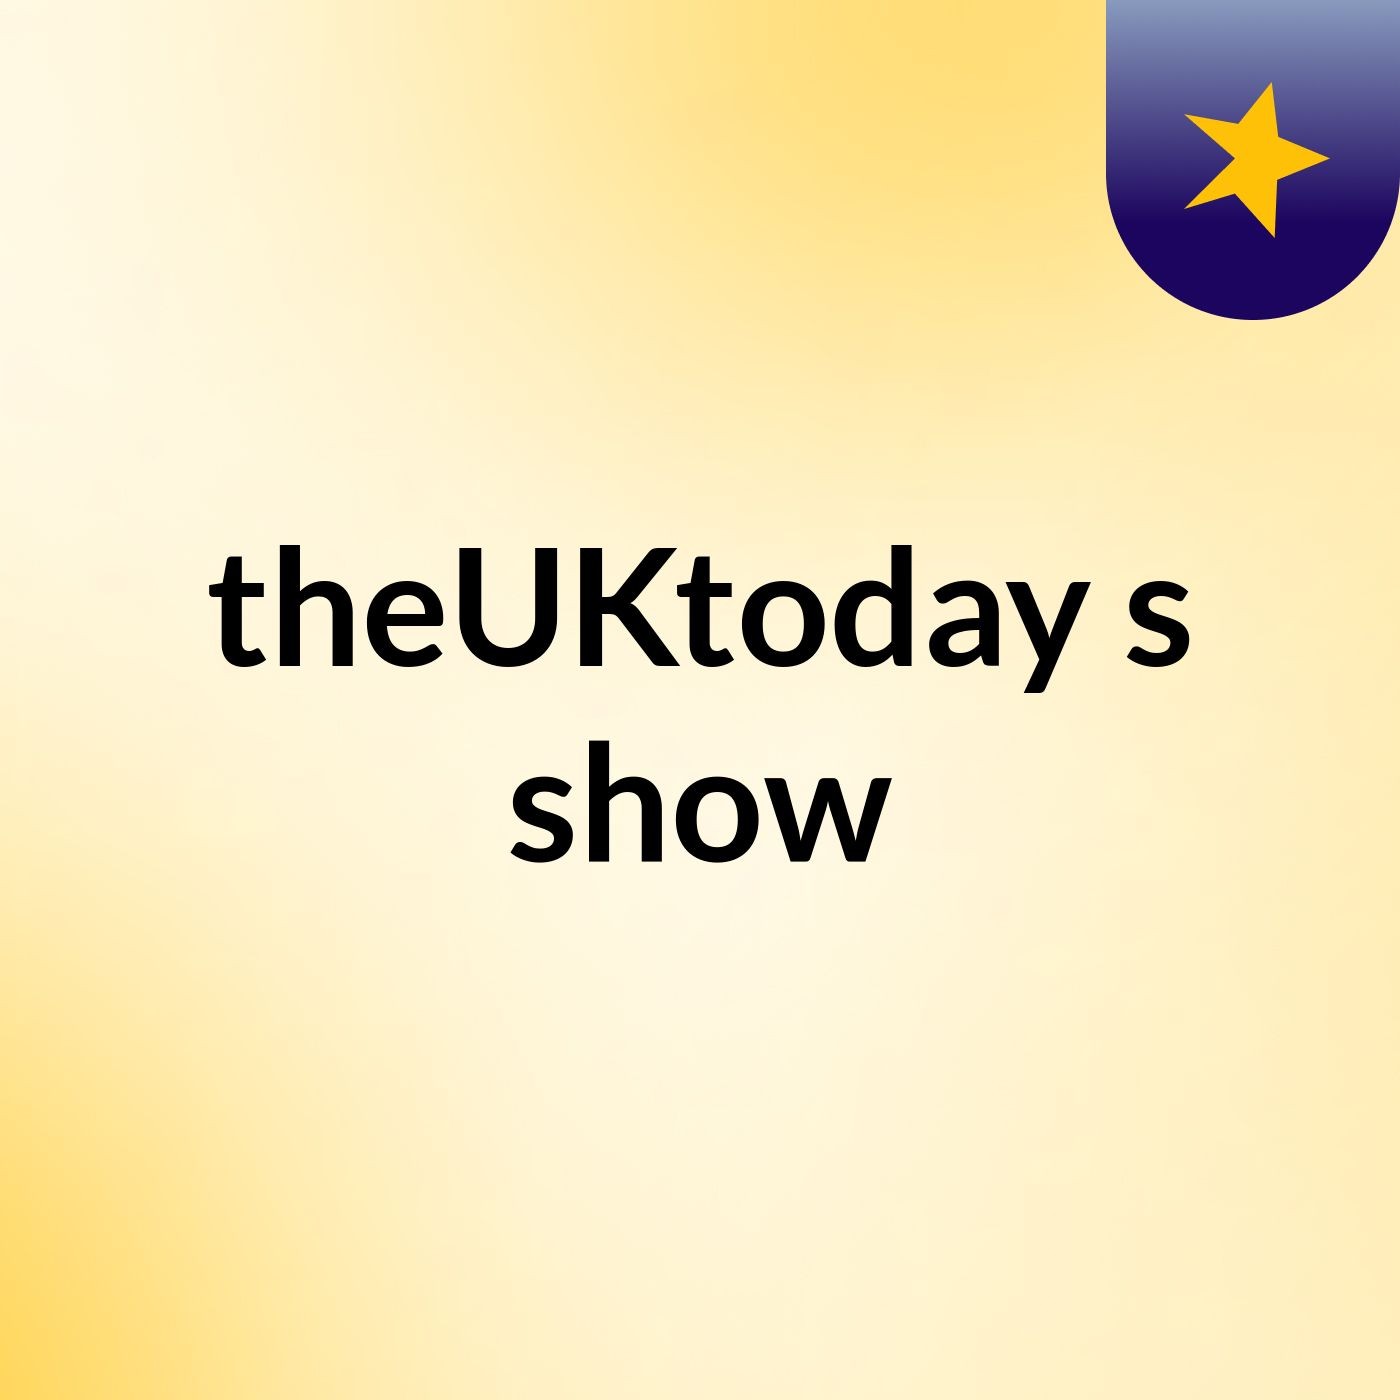 theUKtoday's show